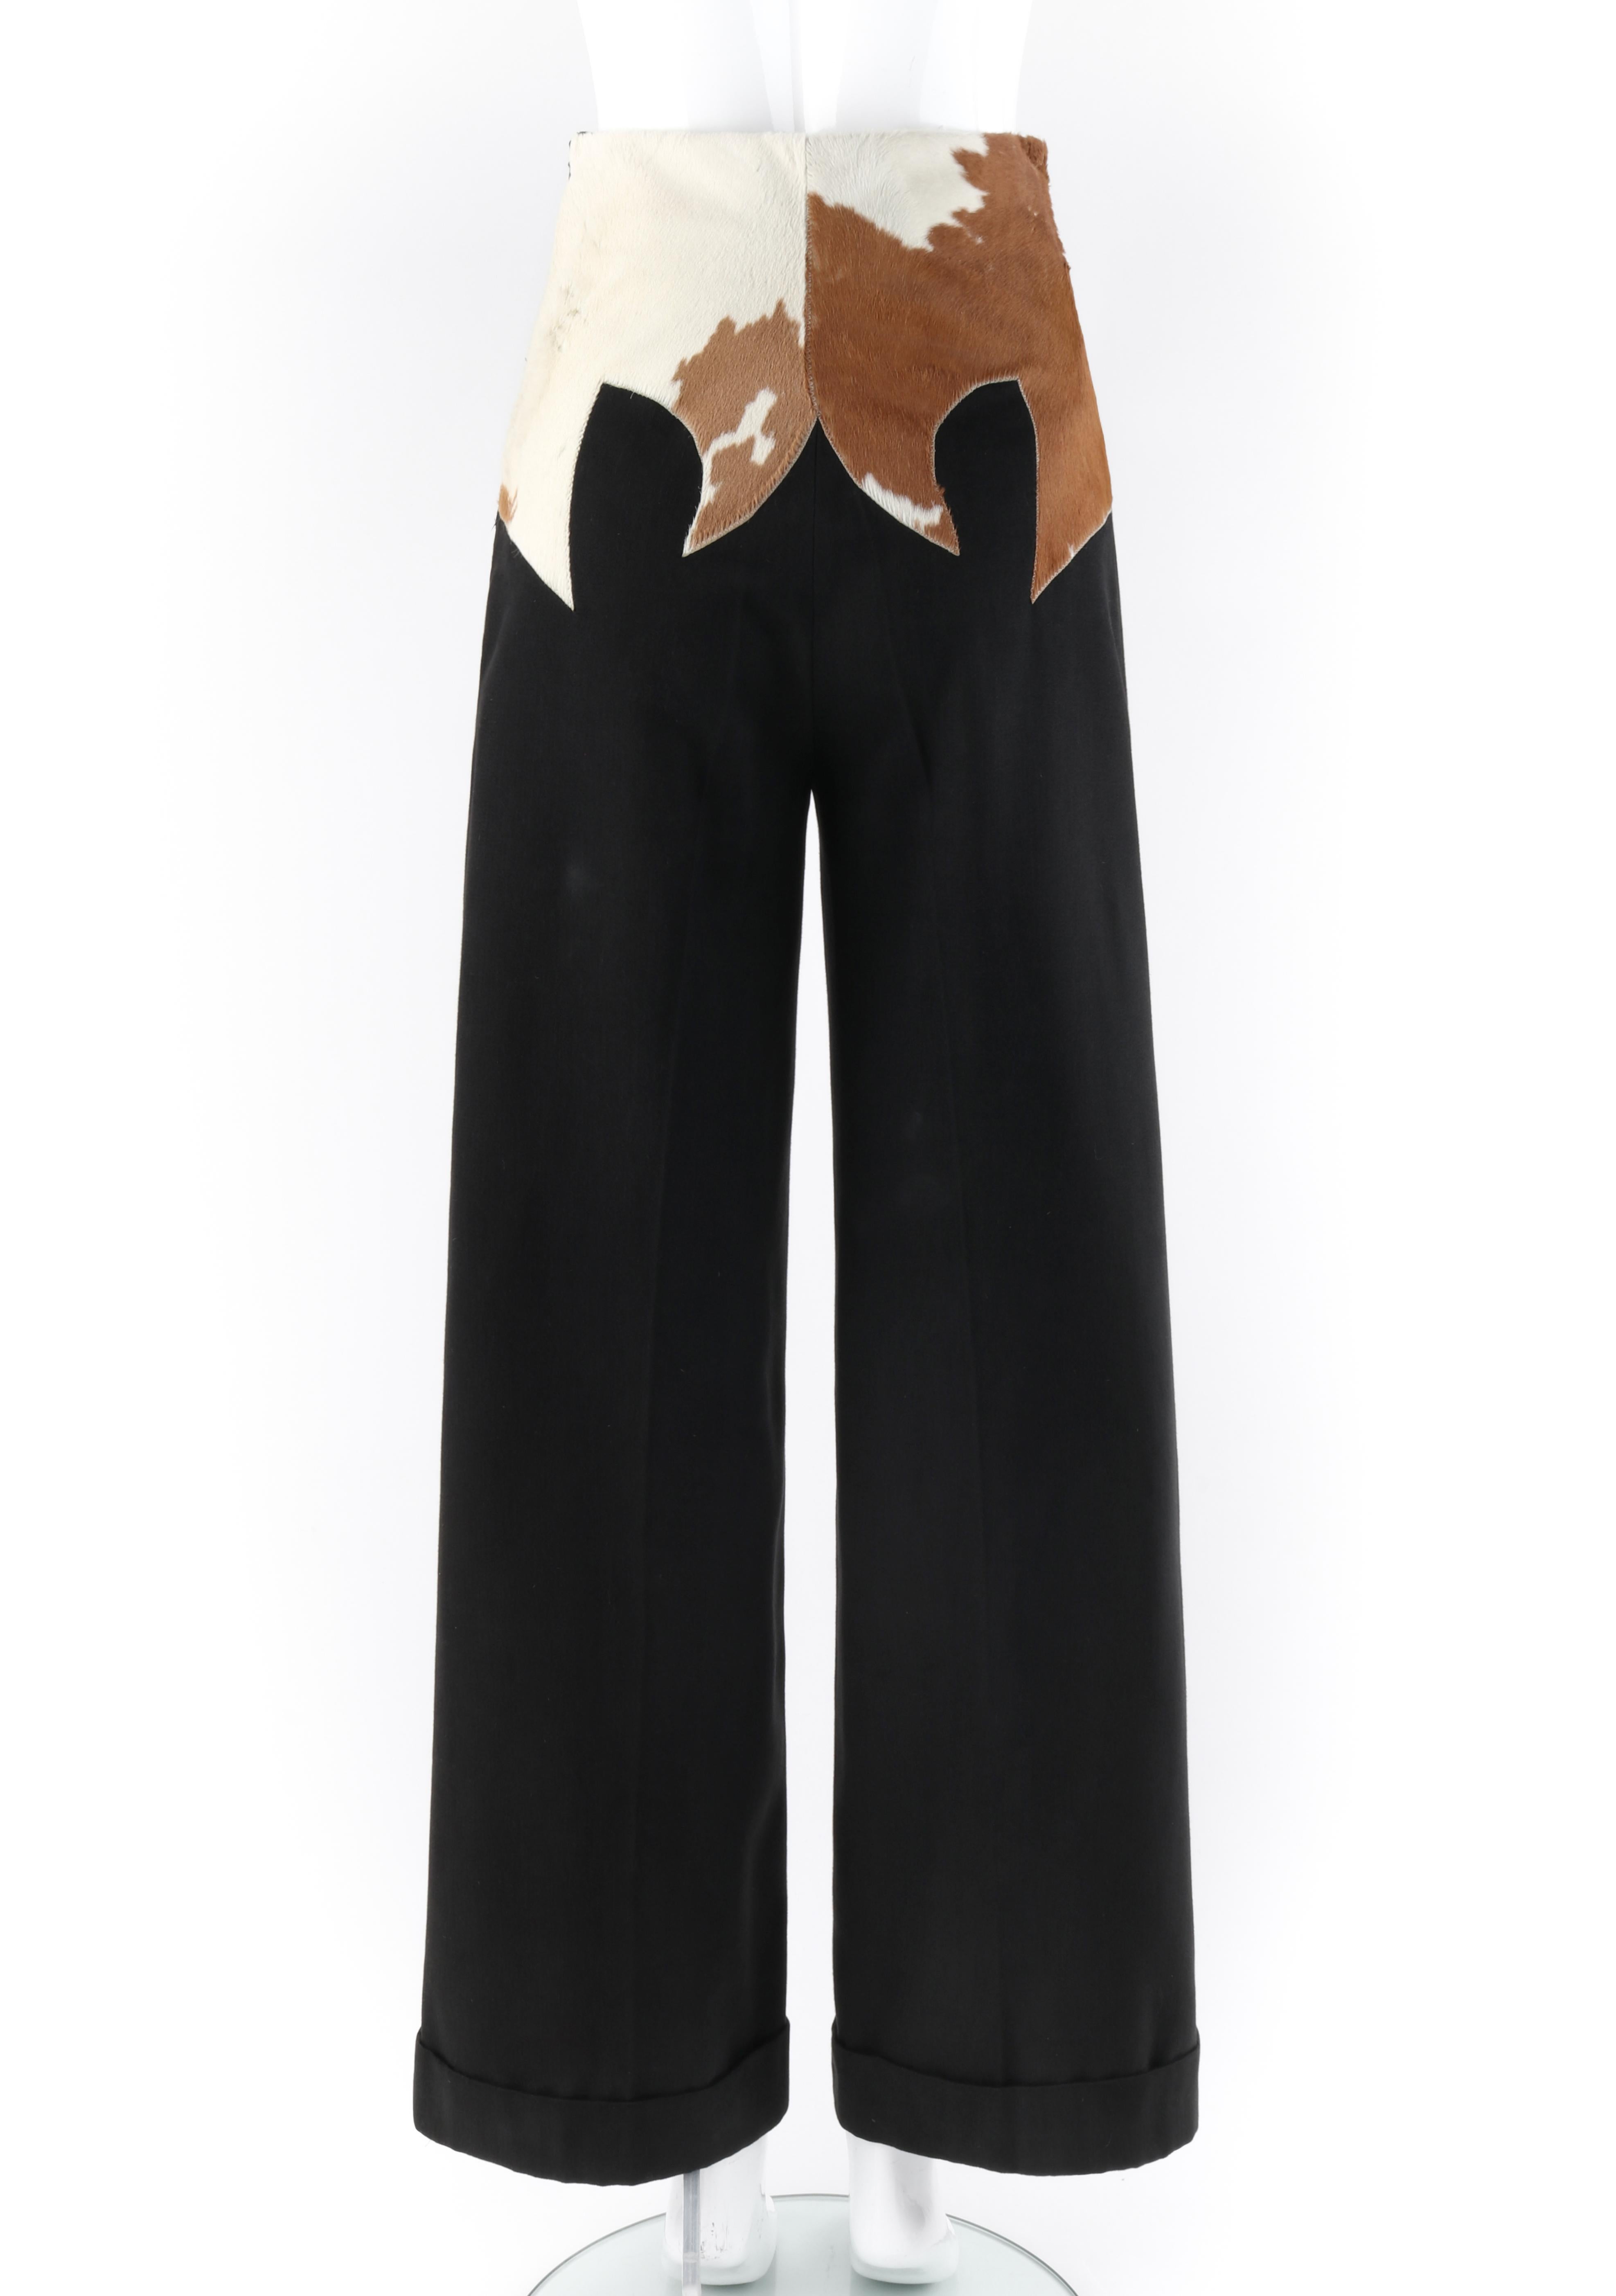 Black ALEXANDER McQUEEN F/W 1997 “It’s A Jungle Out There” Cowhide Trousers Wide Pants For Sale